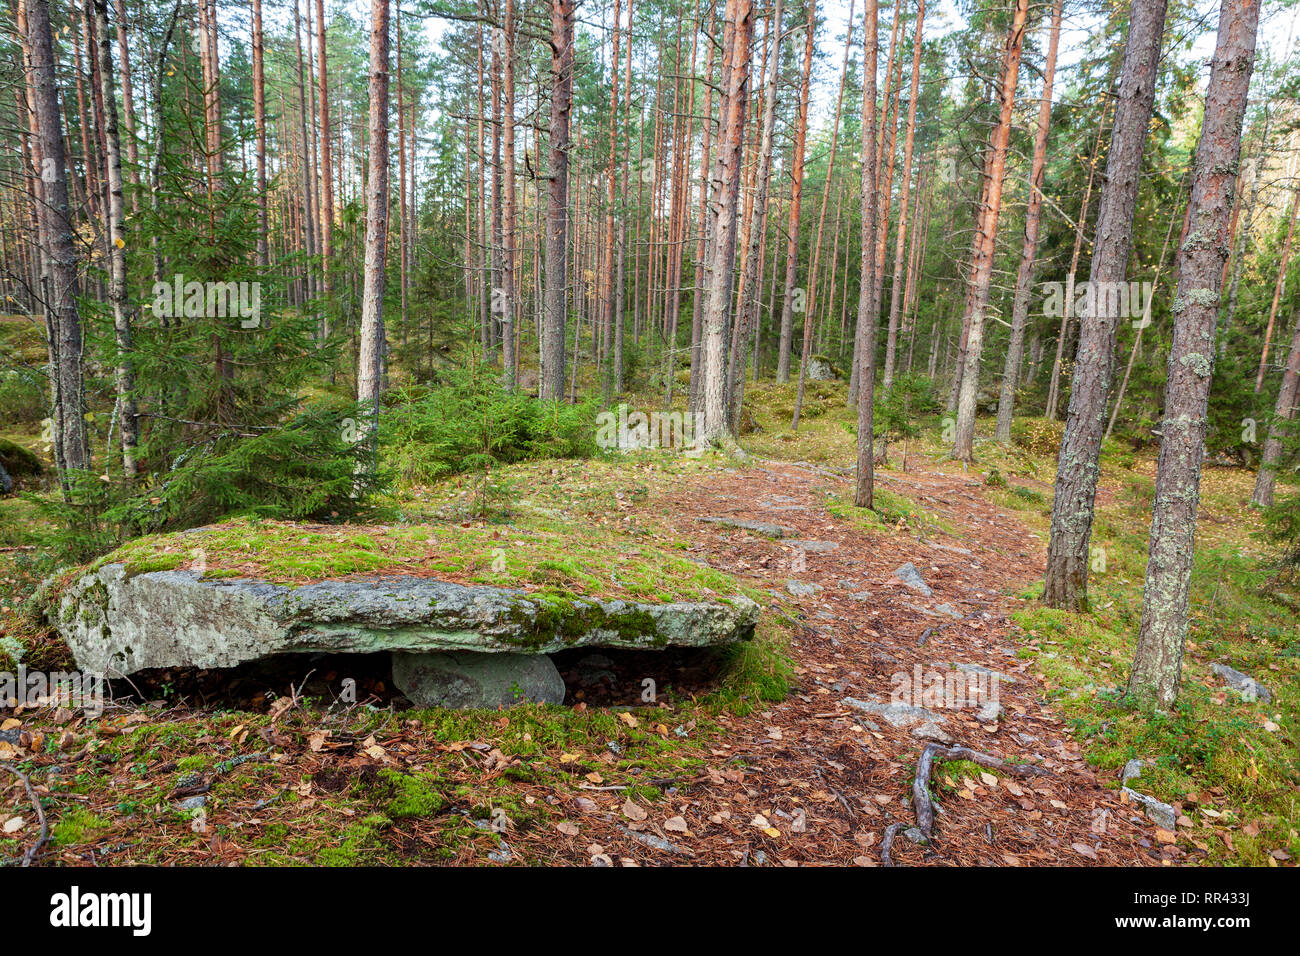 Big rock in forest landscape Stock Photo